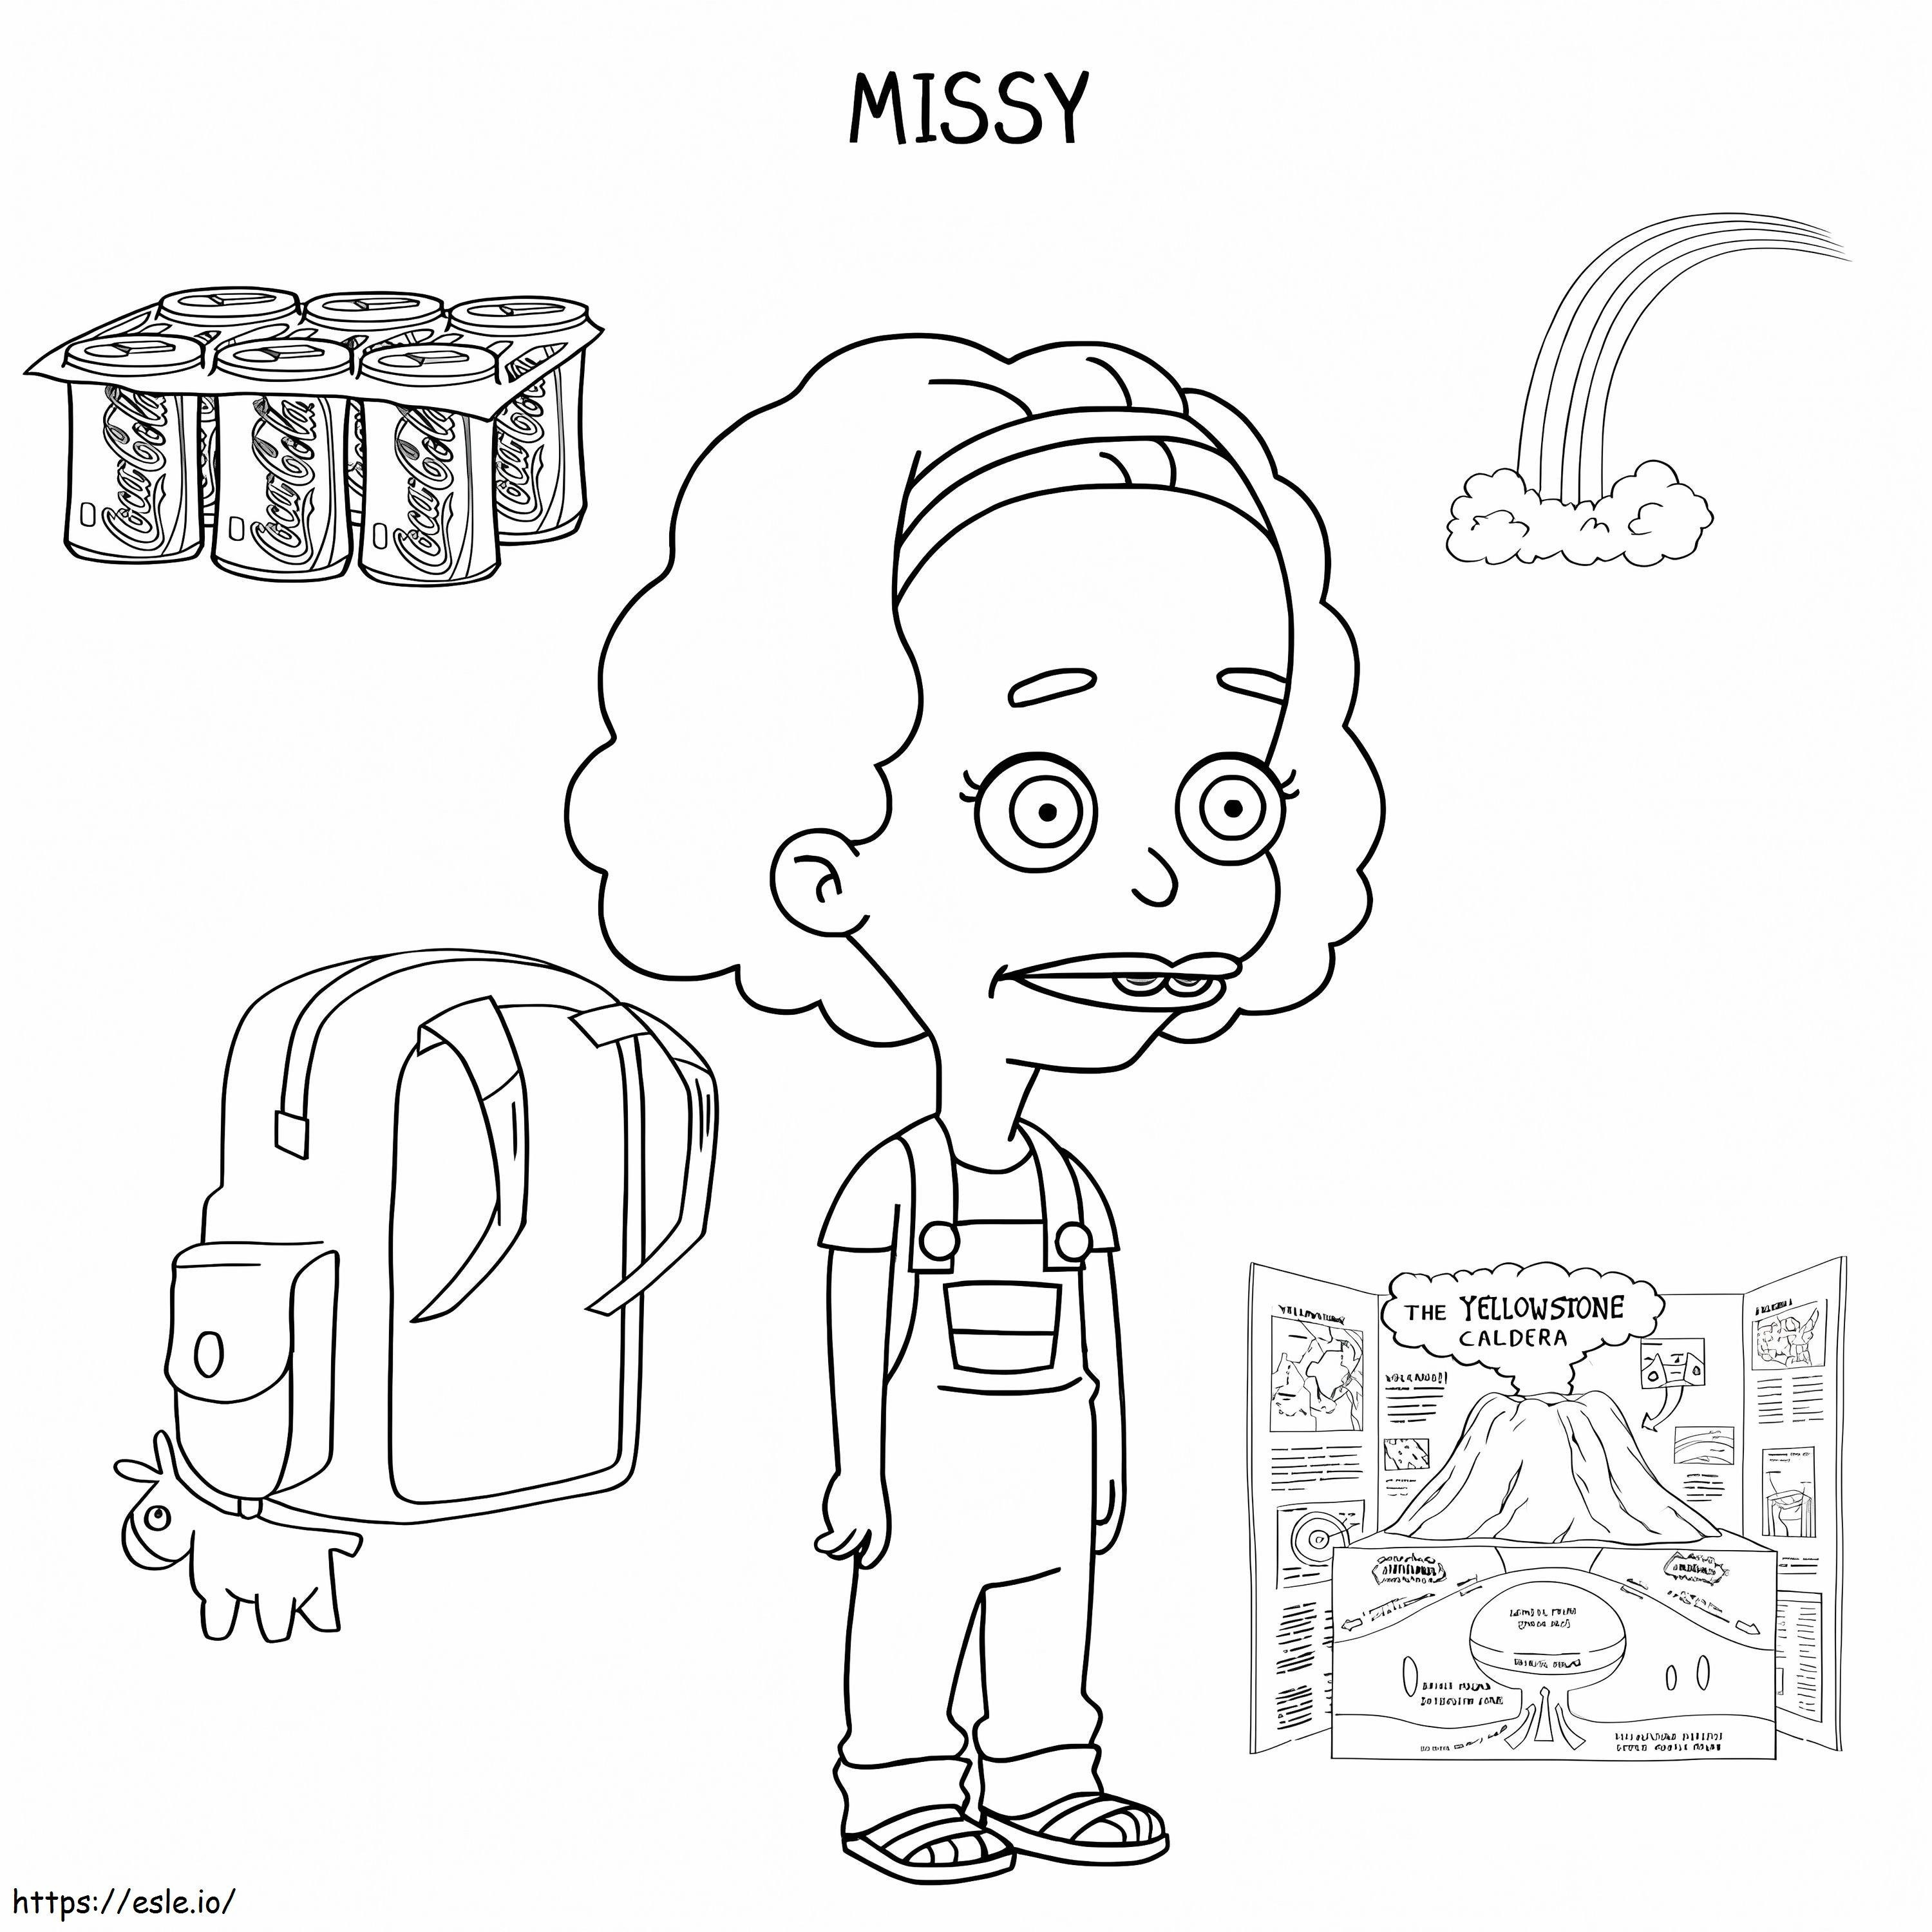 Missy From Big Mouth coloring page